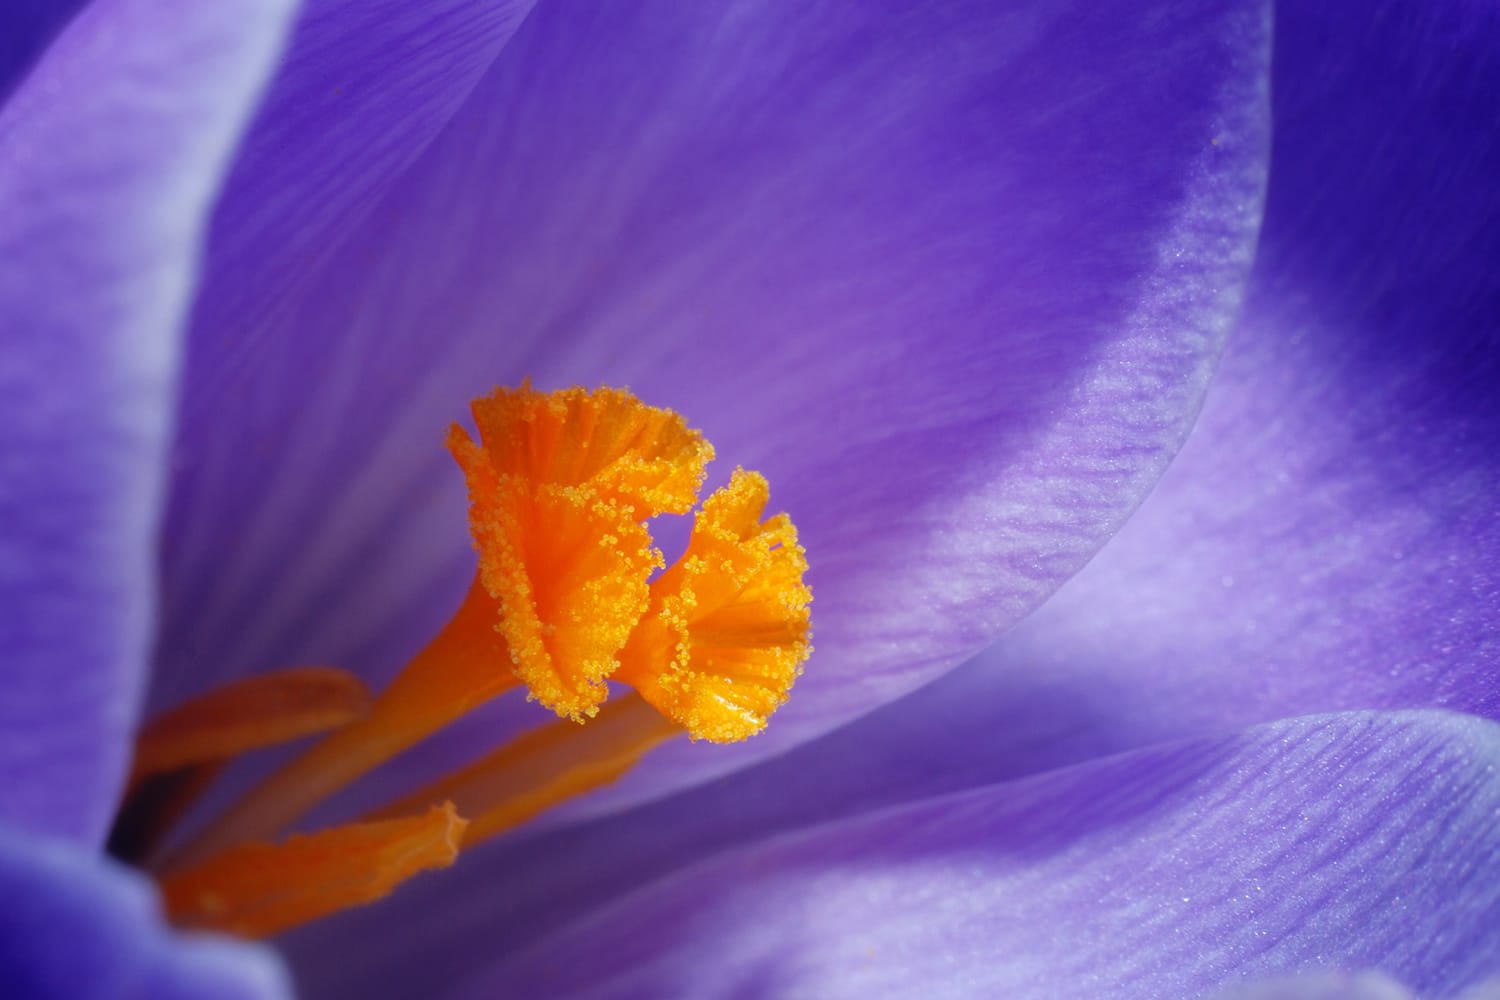 The Complete Guide to Getting Started With Macro Photography